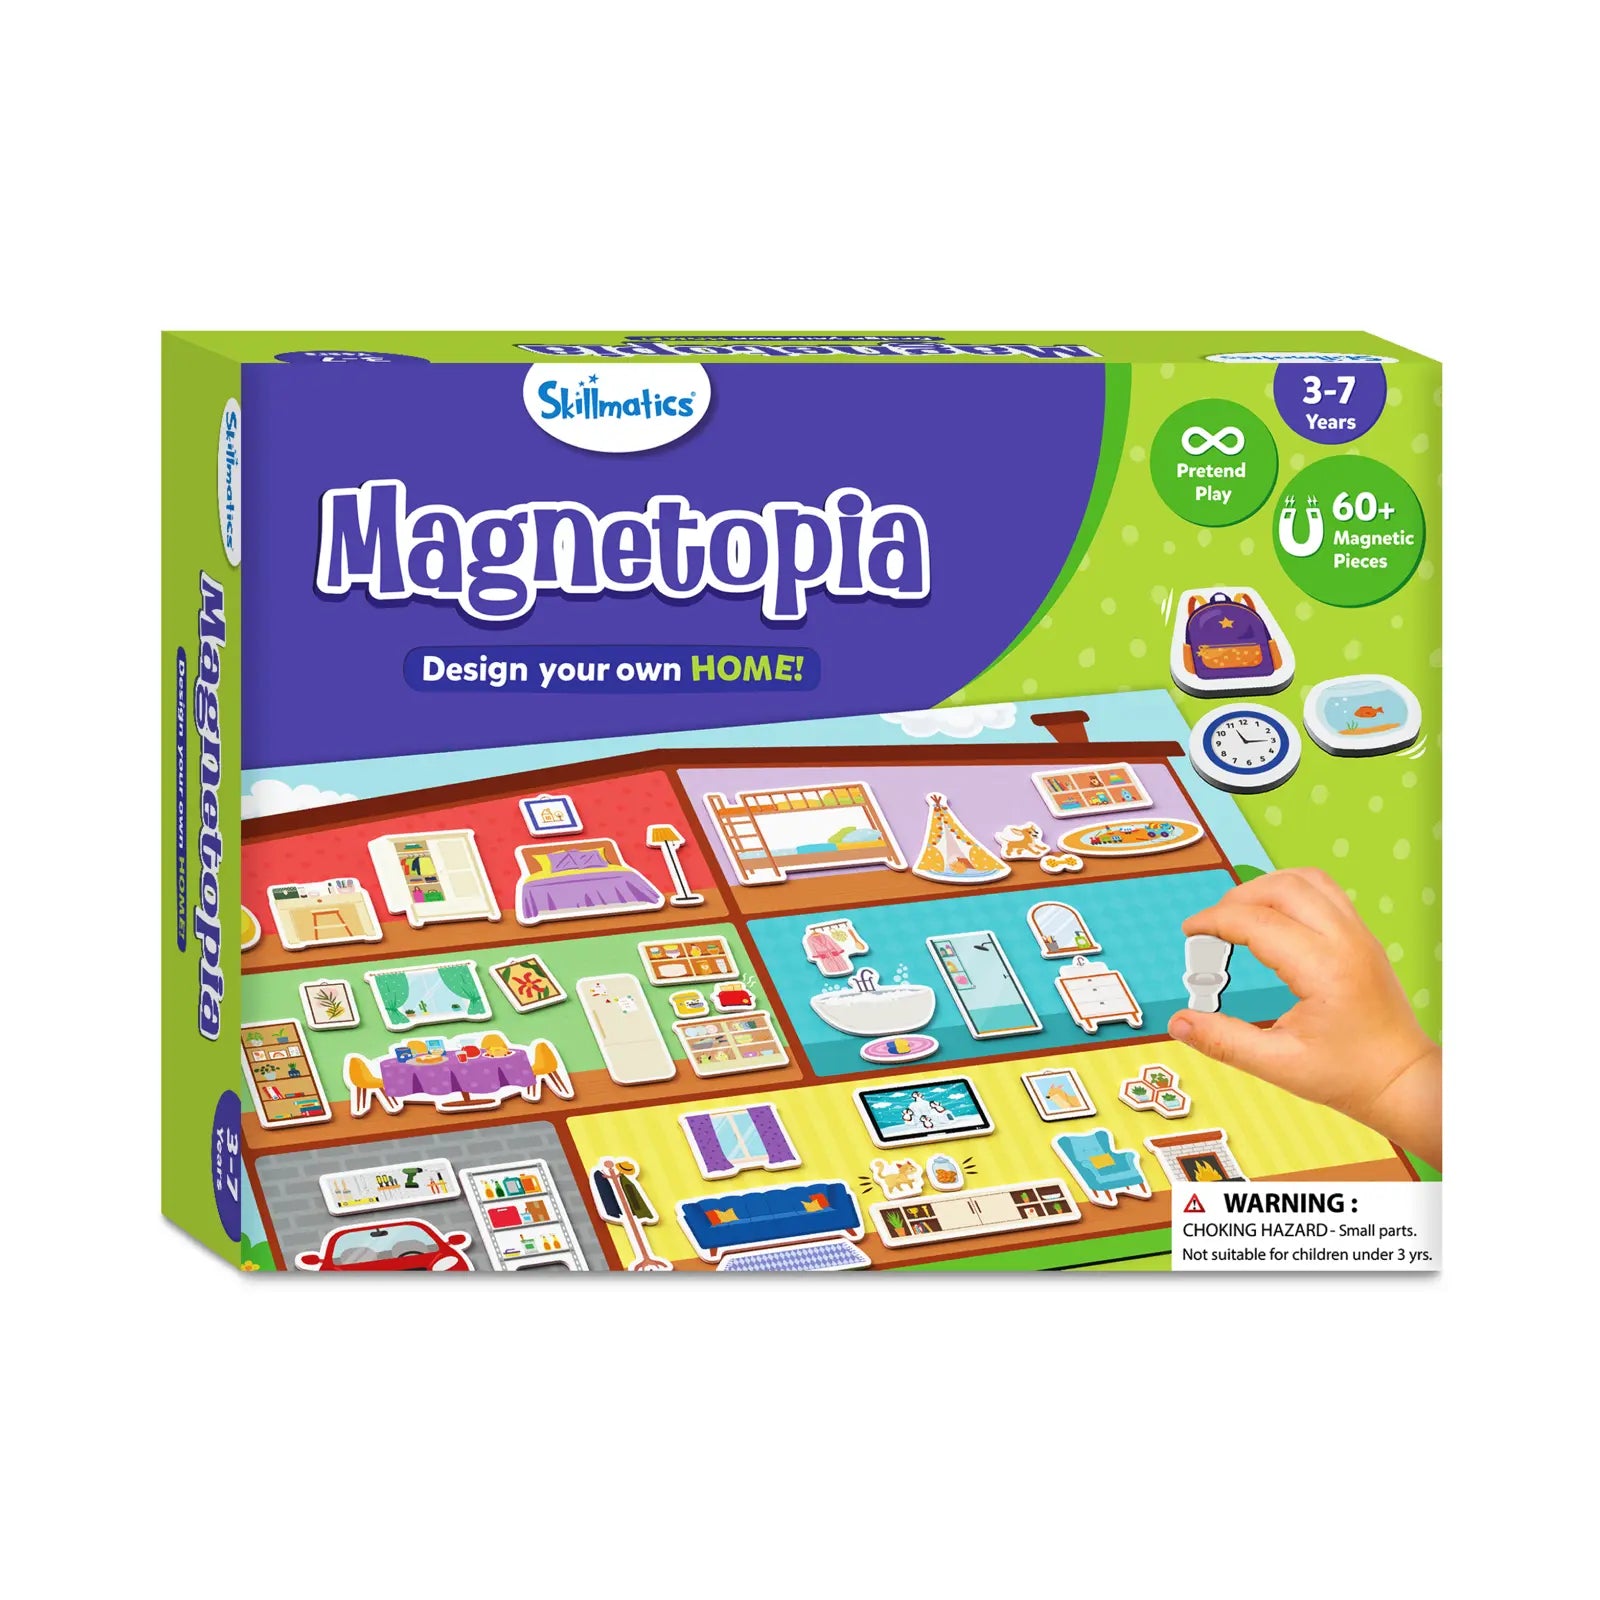 Magnetopia - Design Your Own Home | Interactive Pretend Play Set (ages 3-7)